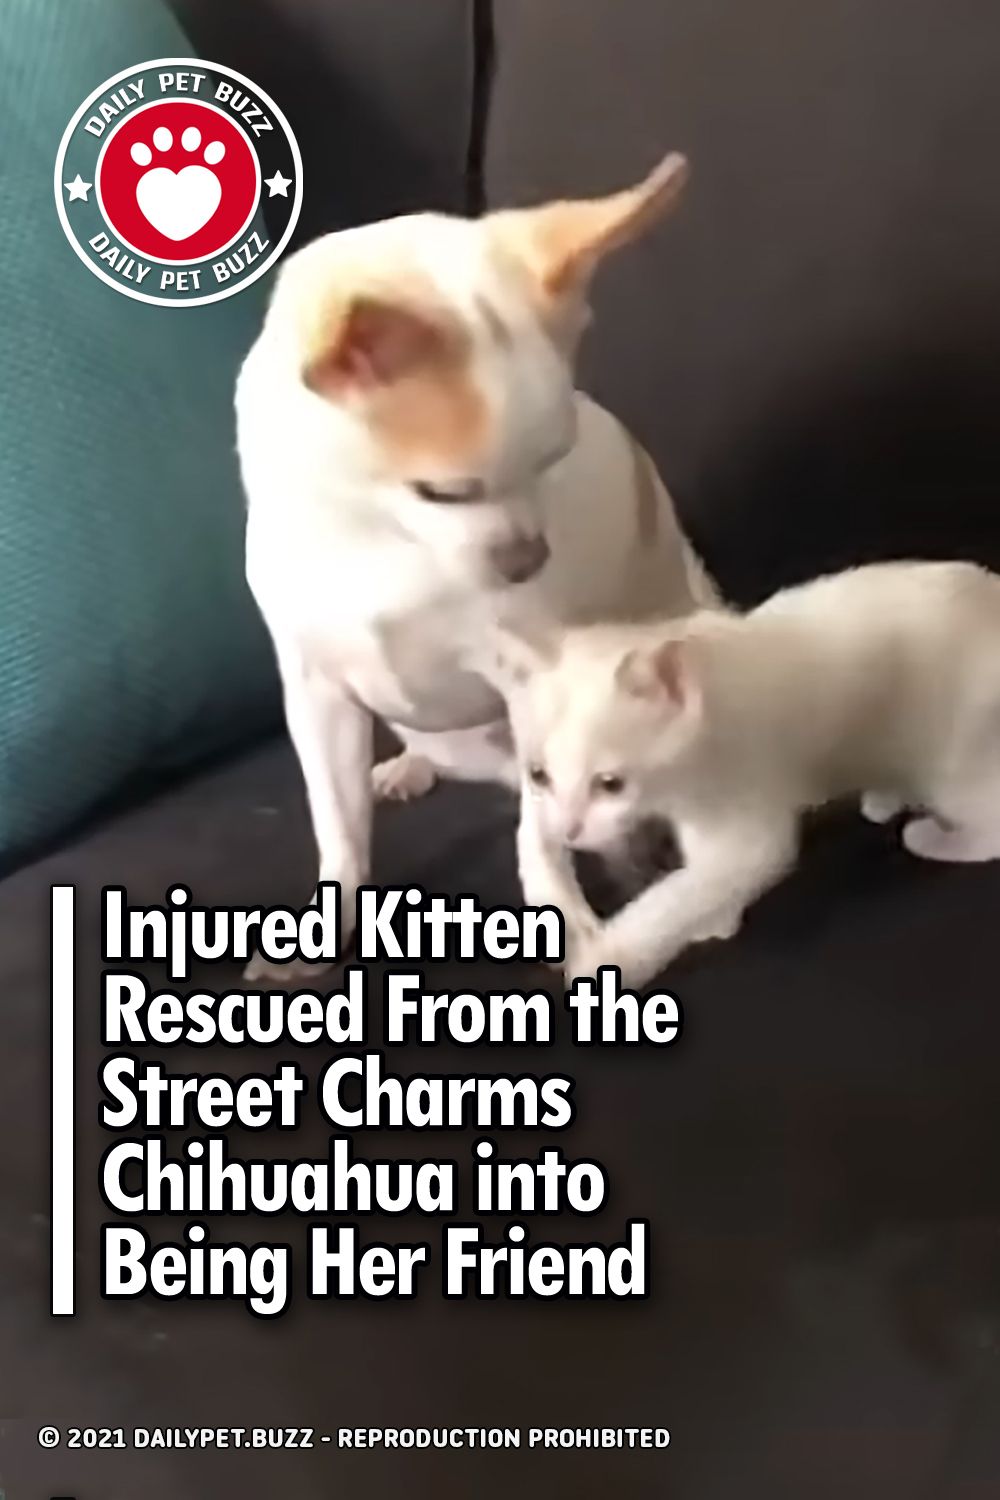 Injured Kitten Rescued From the Street Charms Chihuahua into Being Her Friend